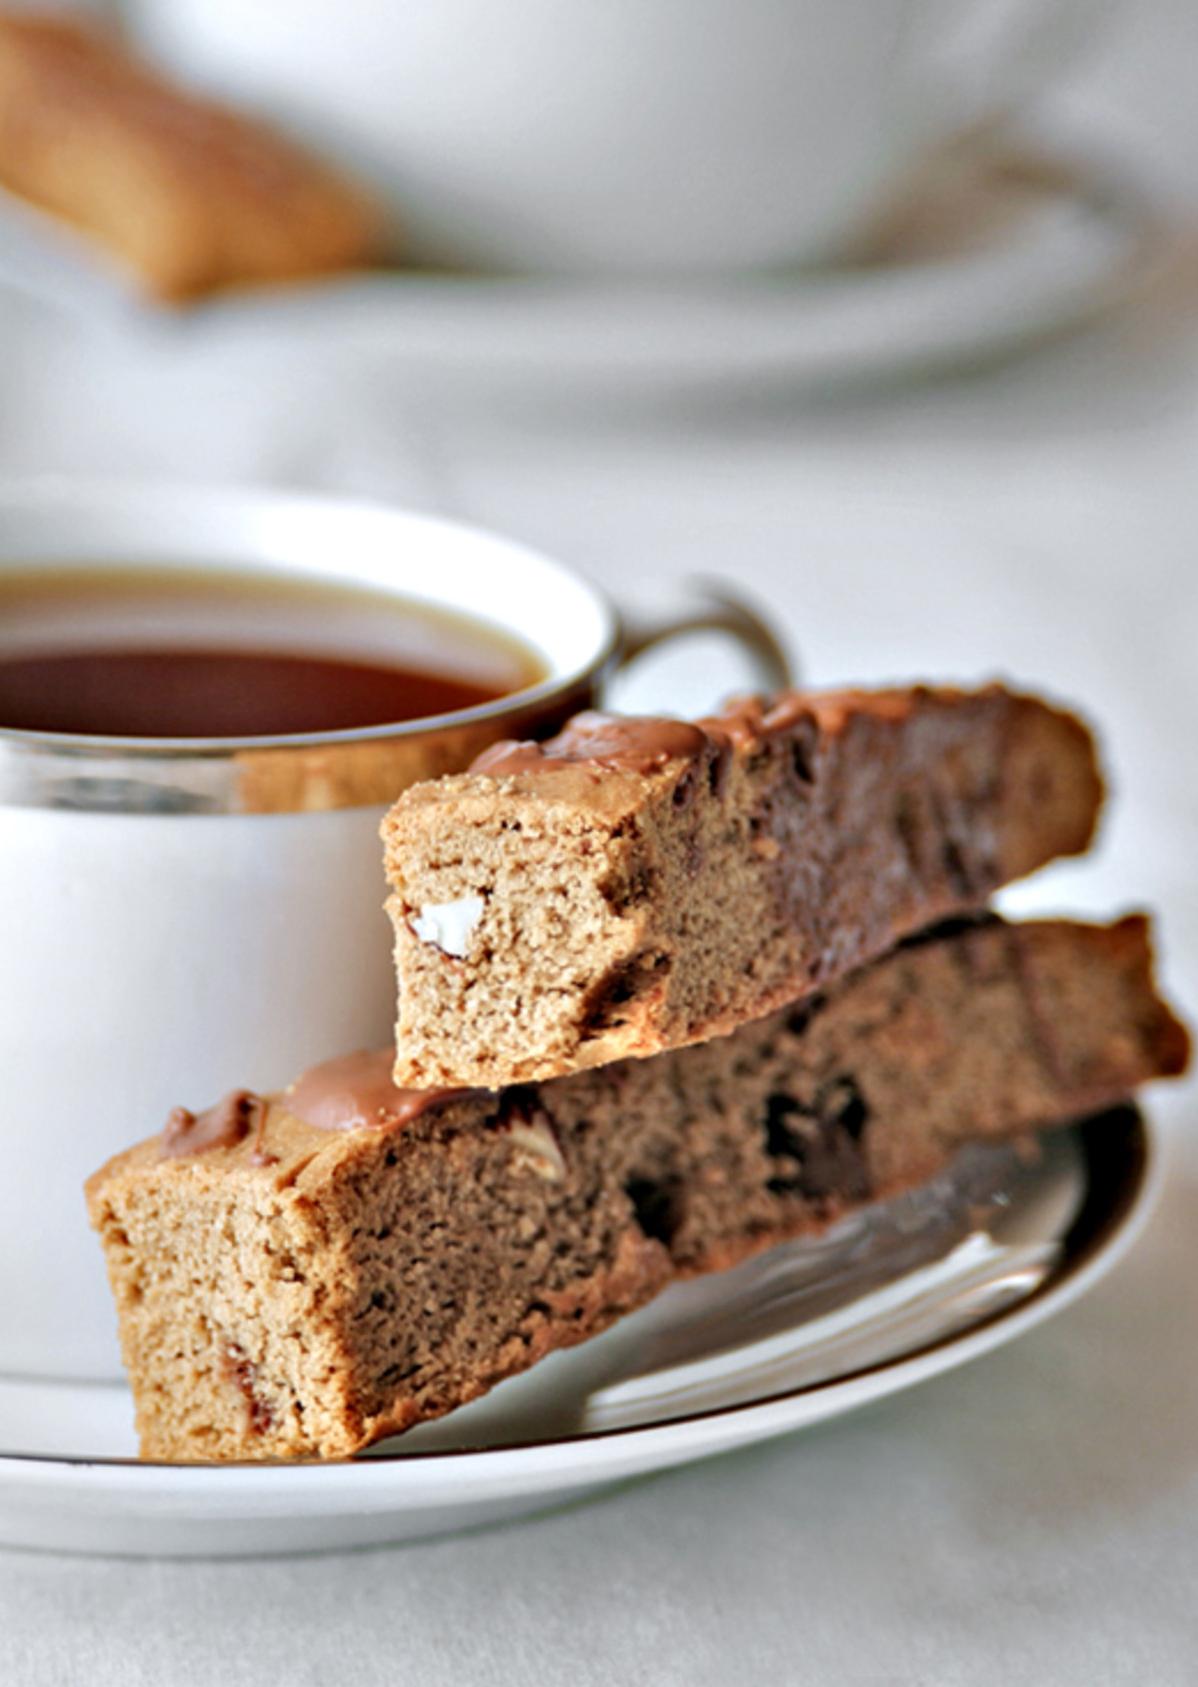  Crunchy and flavorful, this biscotti is perfect for dunking into your morning coffee